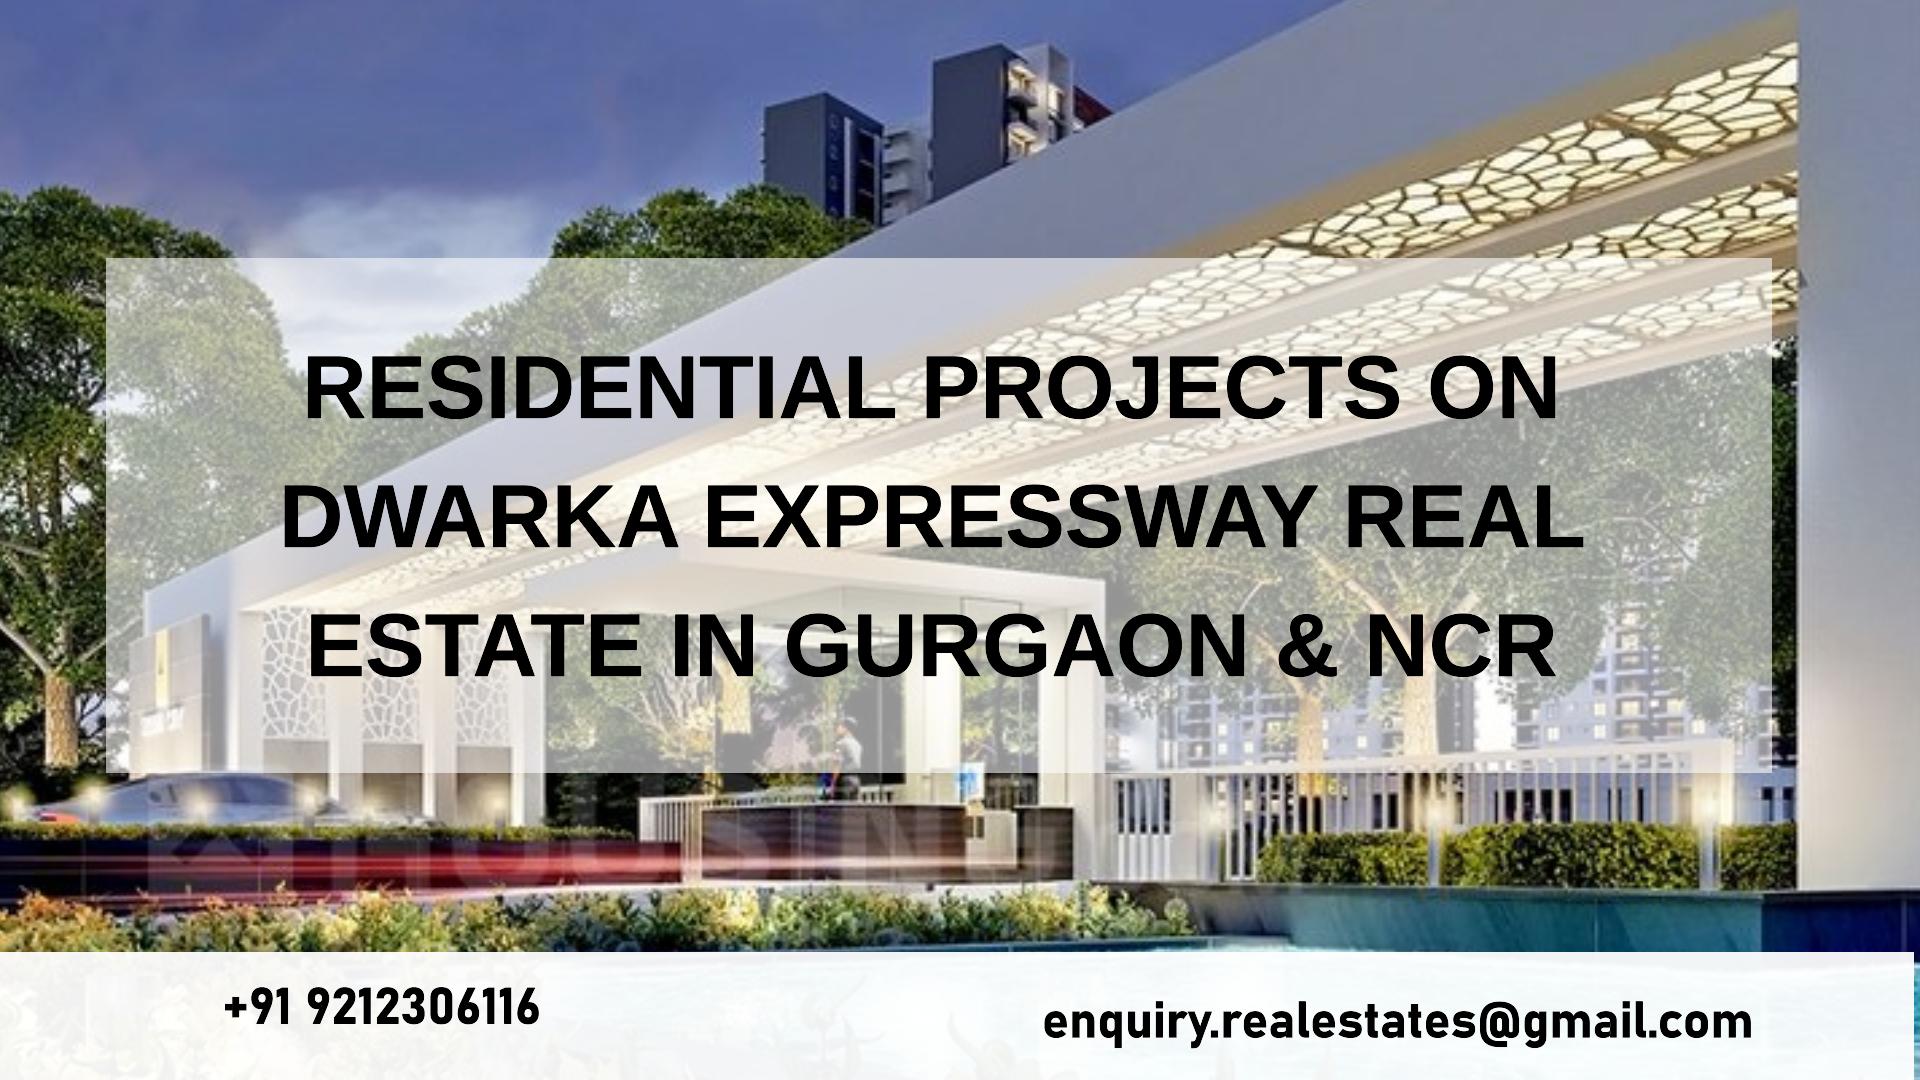 Residential Projects On Dwarka Expressway Real Estate in Gurgaon